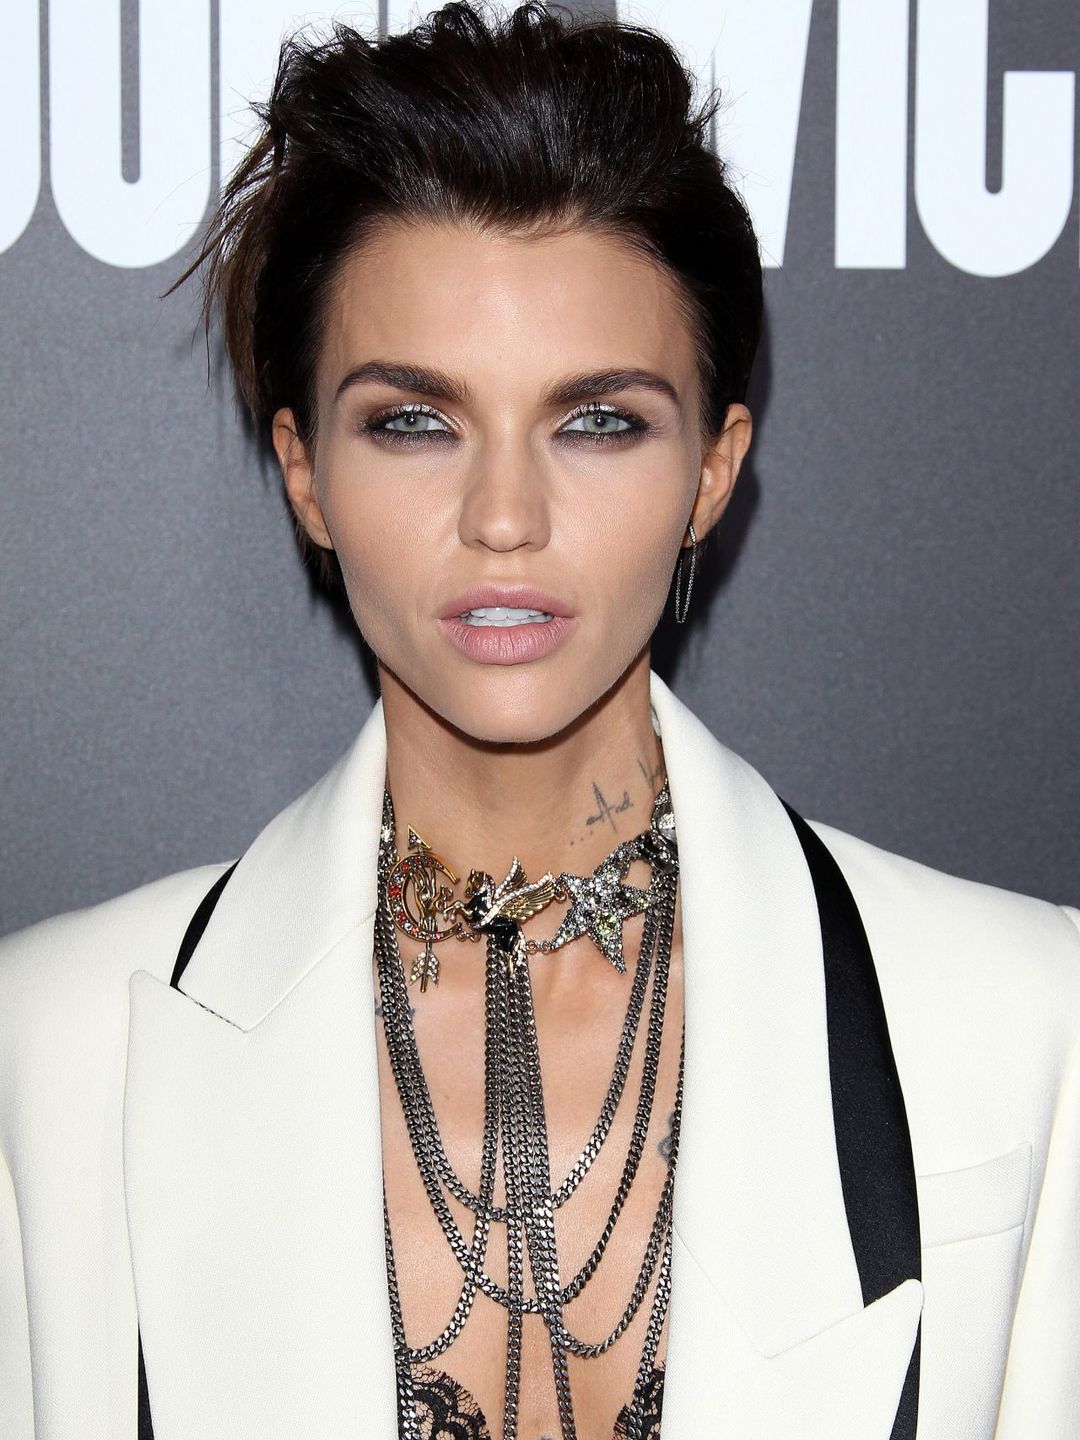 Ruby Rose does she have kids